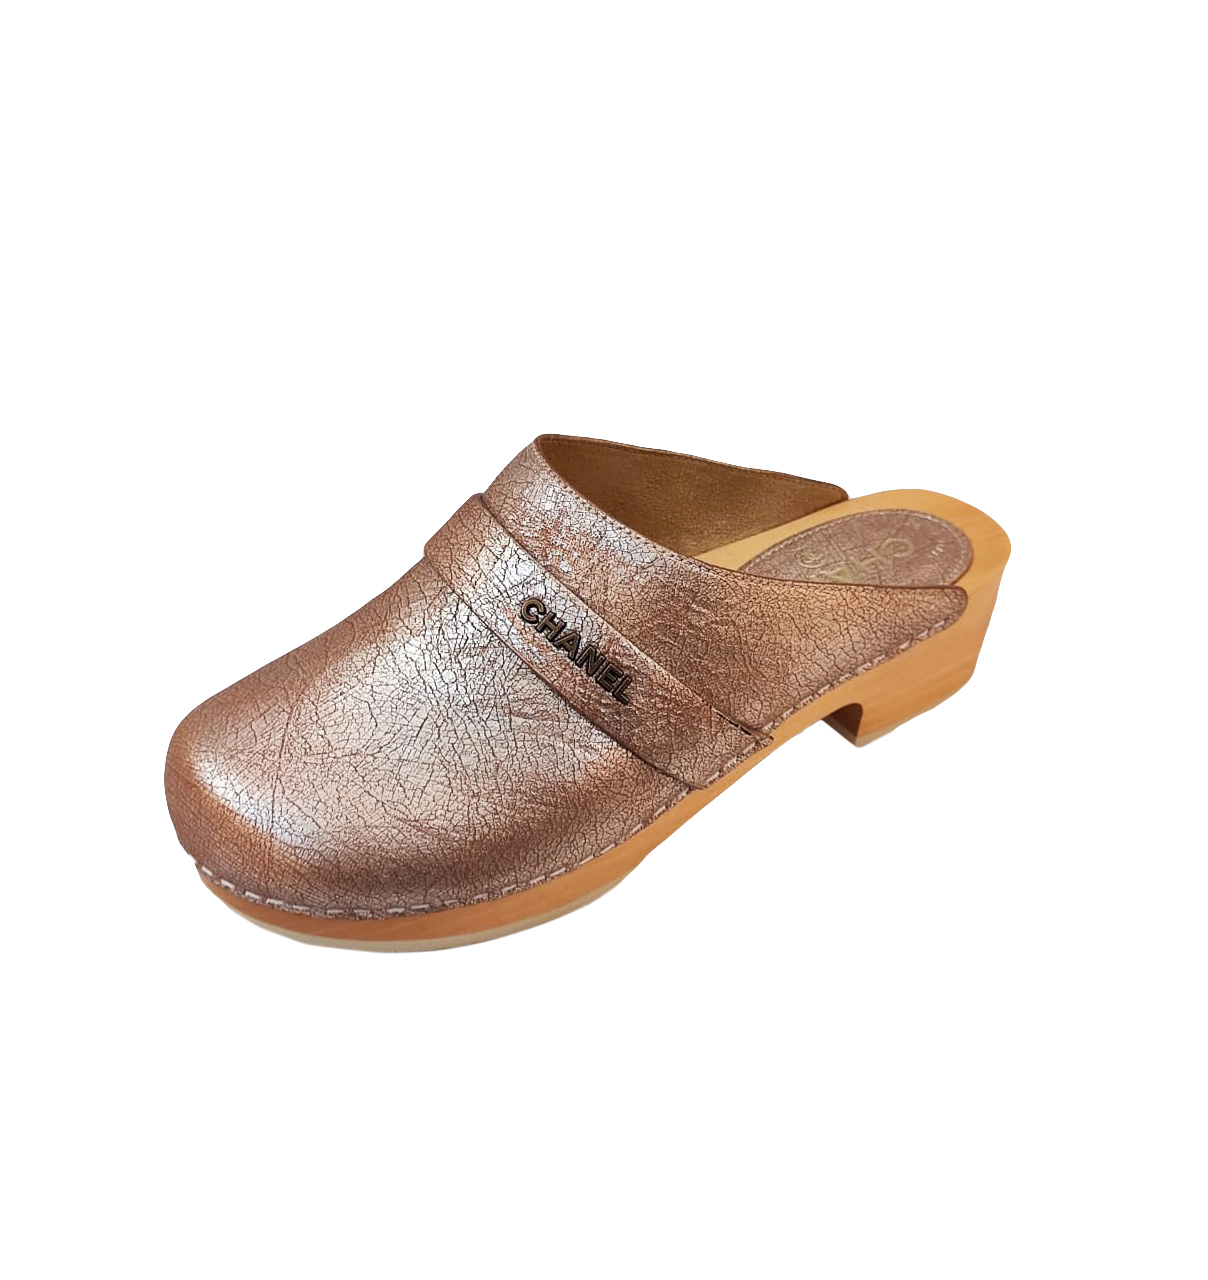 GOLD METALLIC LEATHER CLOGS MULES 37.5 - styleforless